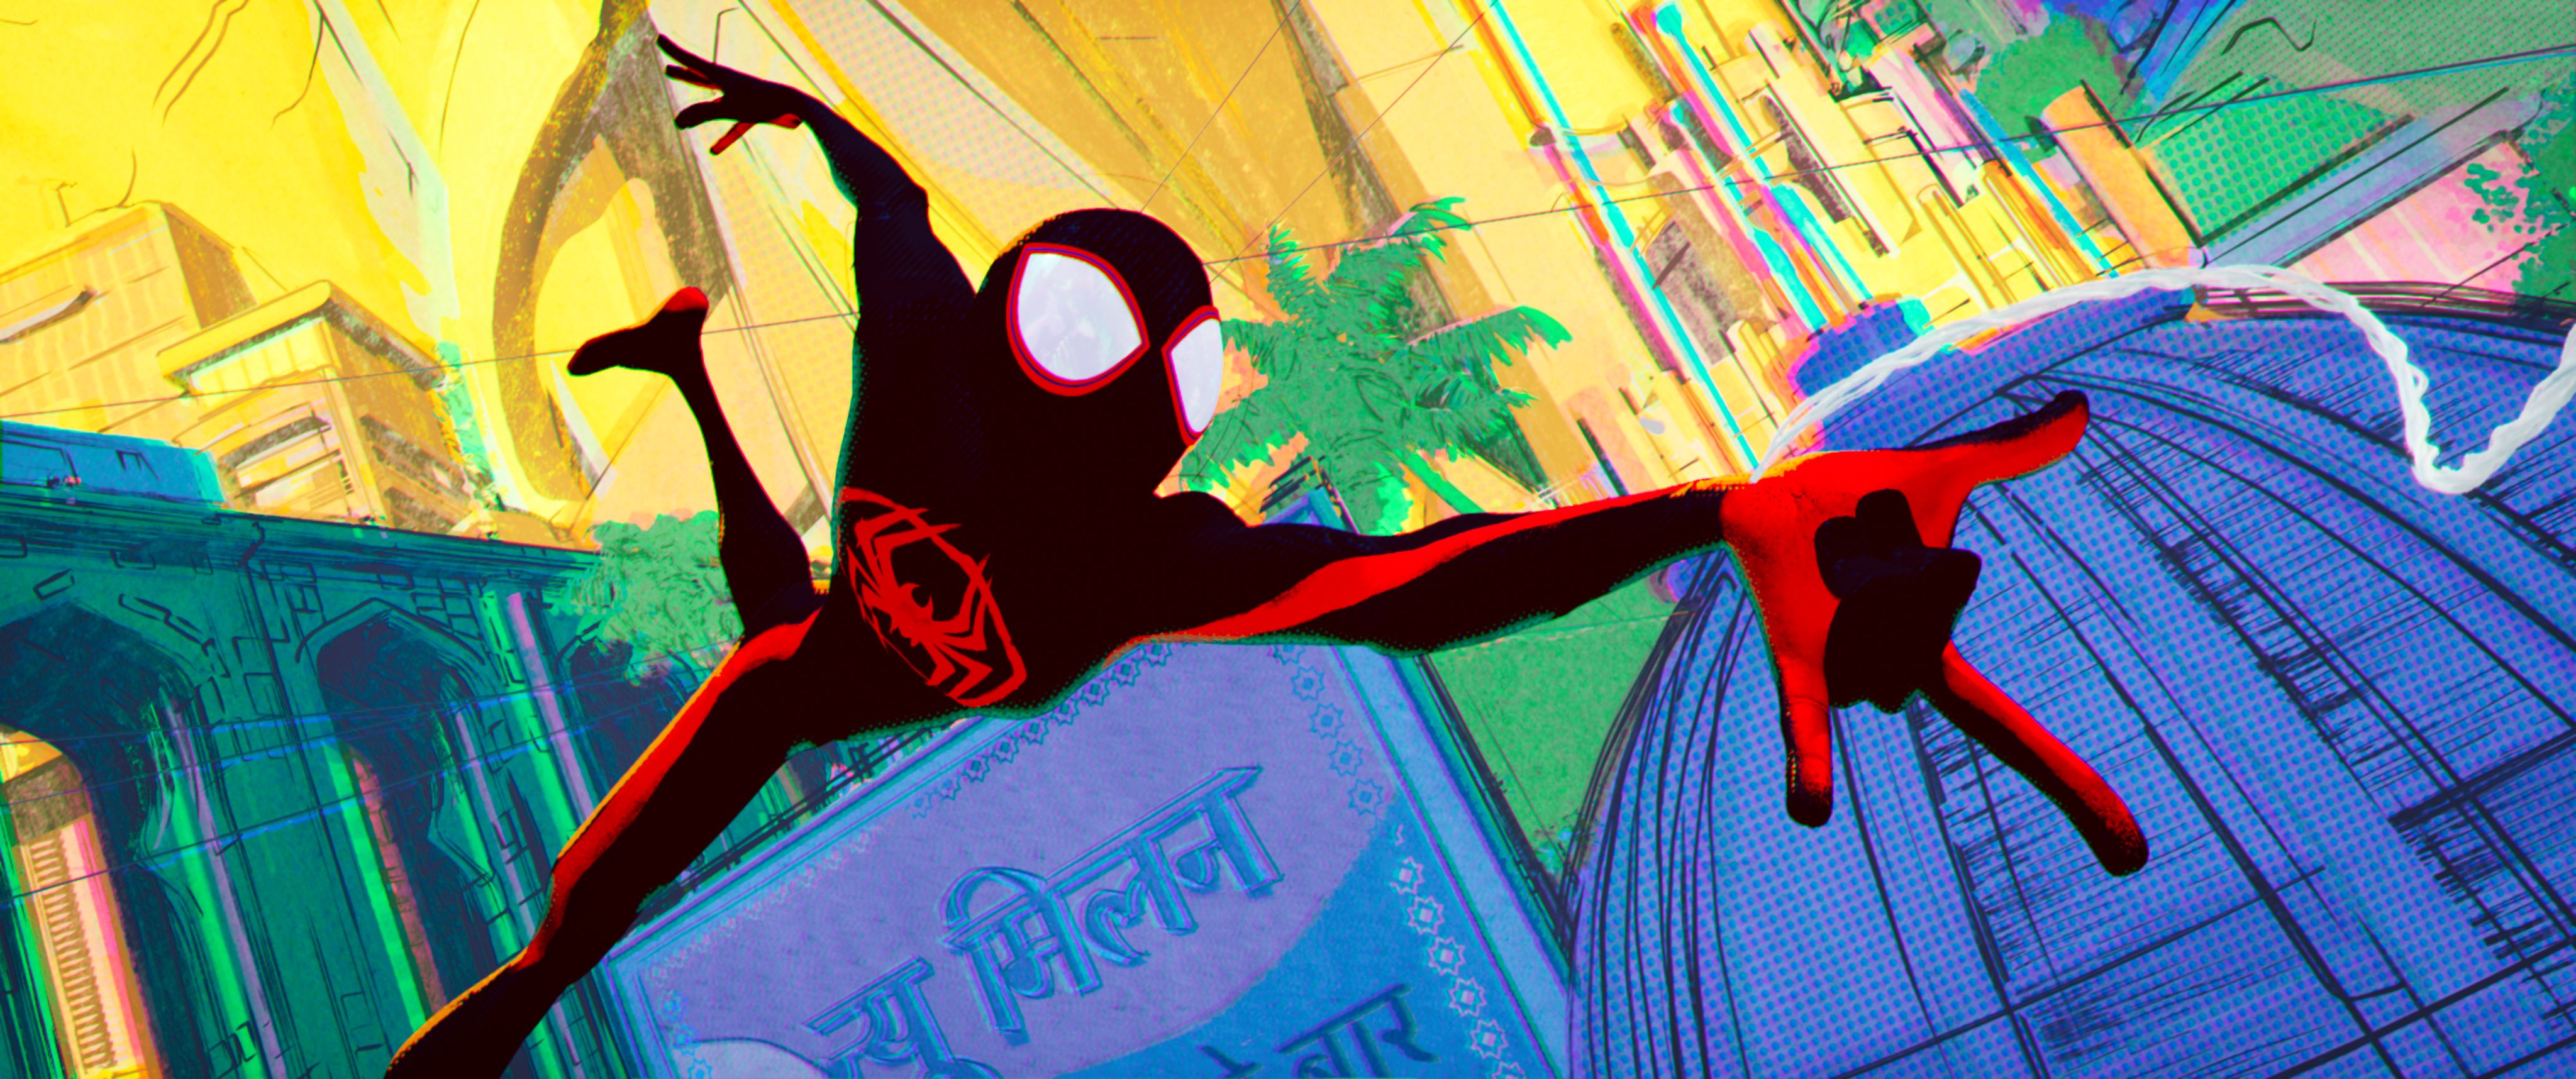 'Spider-Man: Into the Spider-Verse' sequel 'Across the Spider-Verse' takes Spidey to new worlds